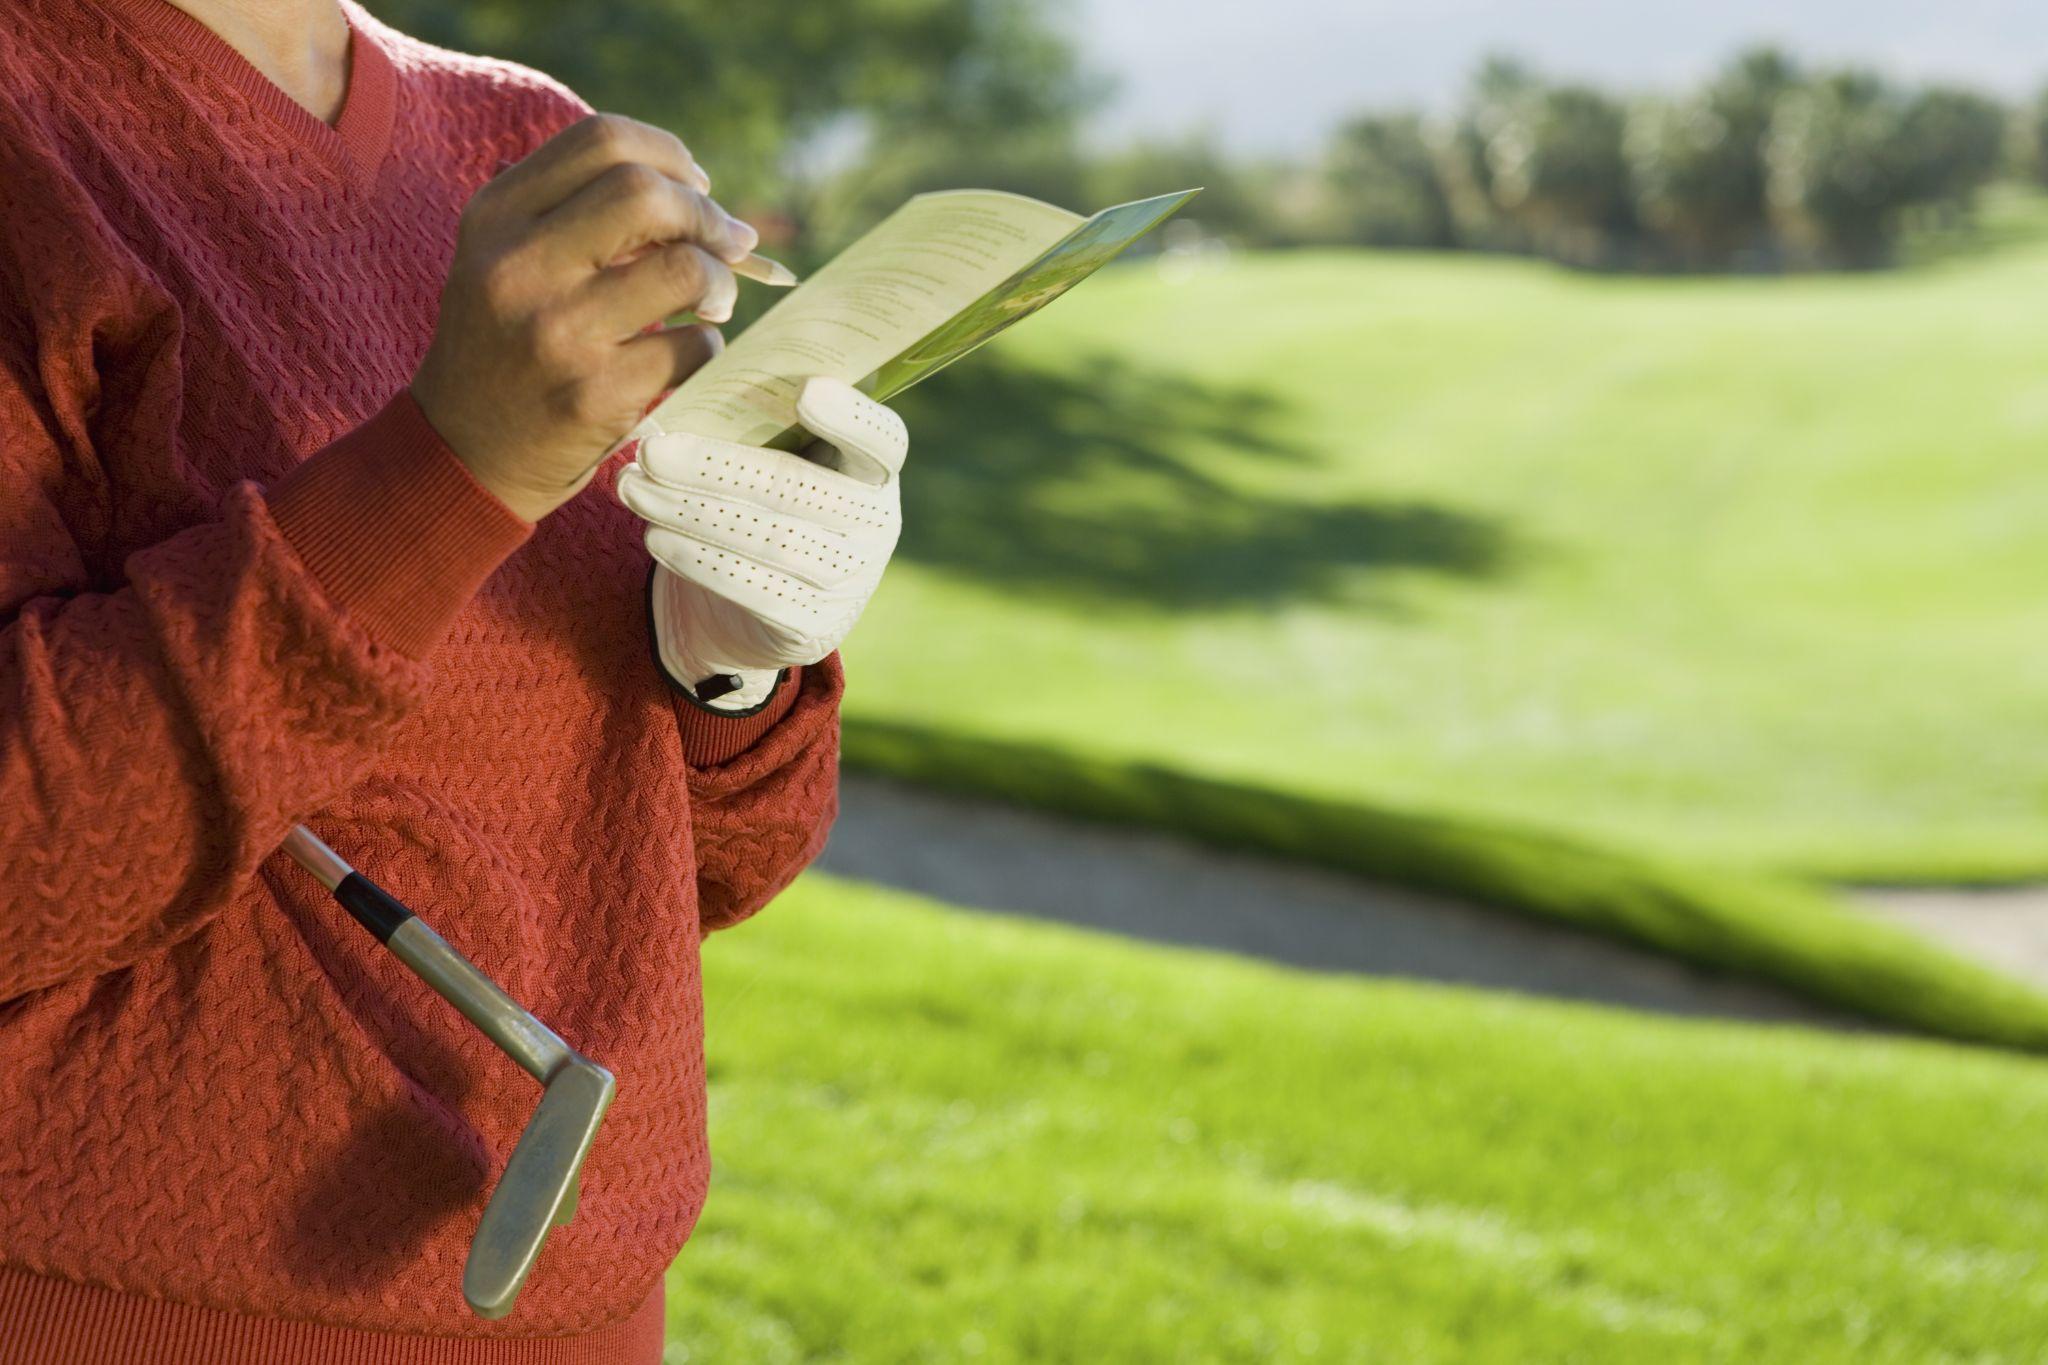 How To Calculate Your Golf Handicap Scores?